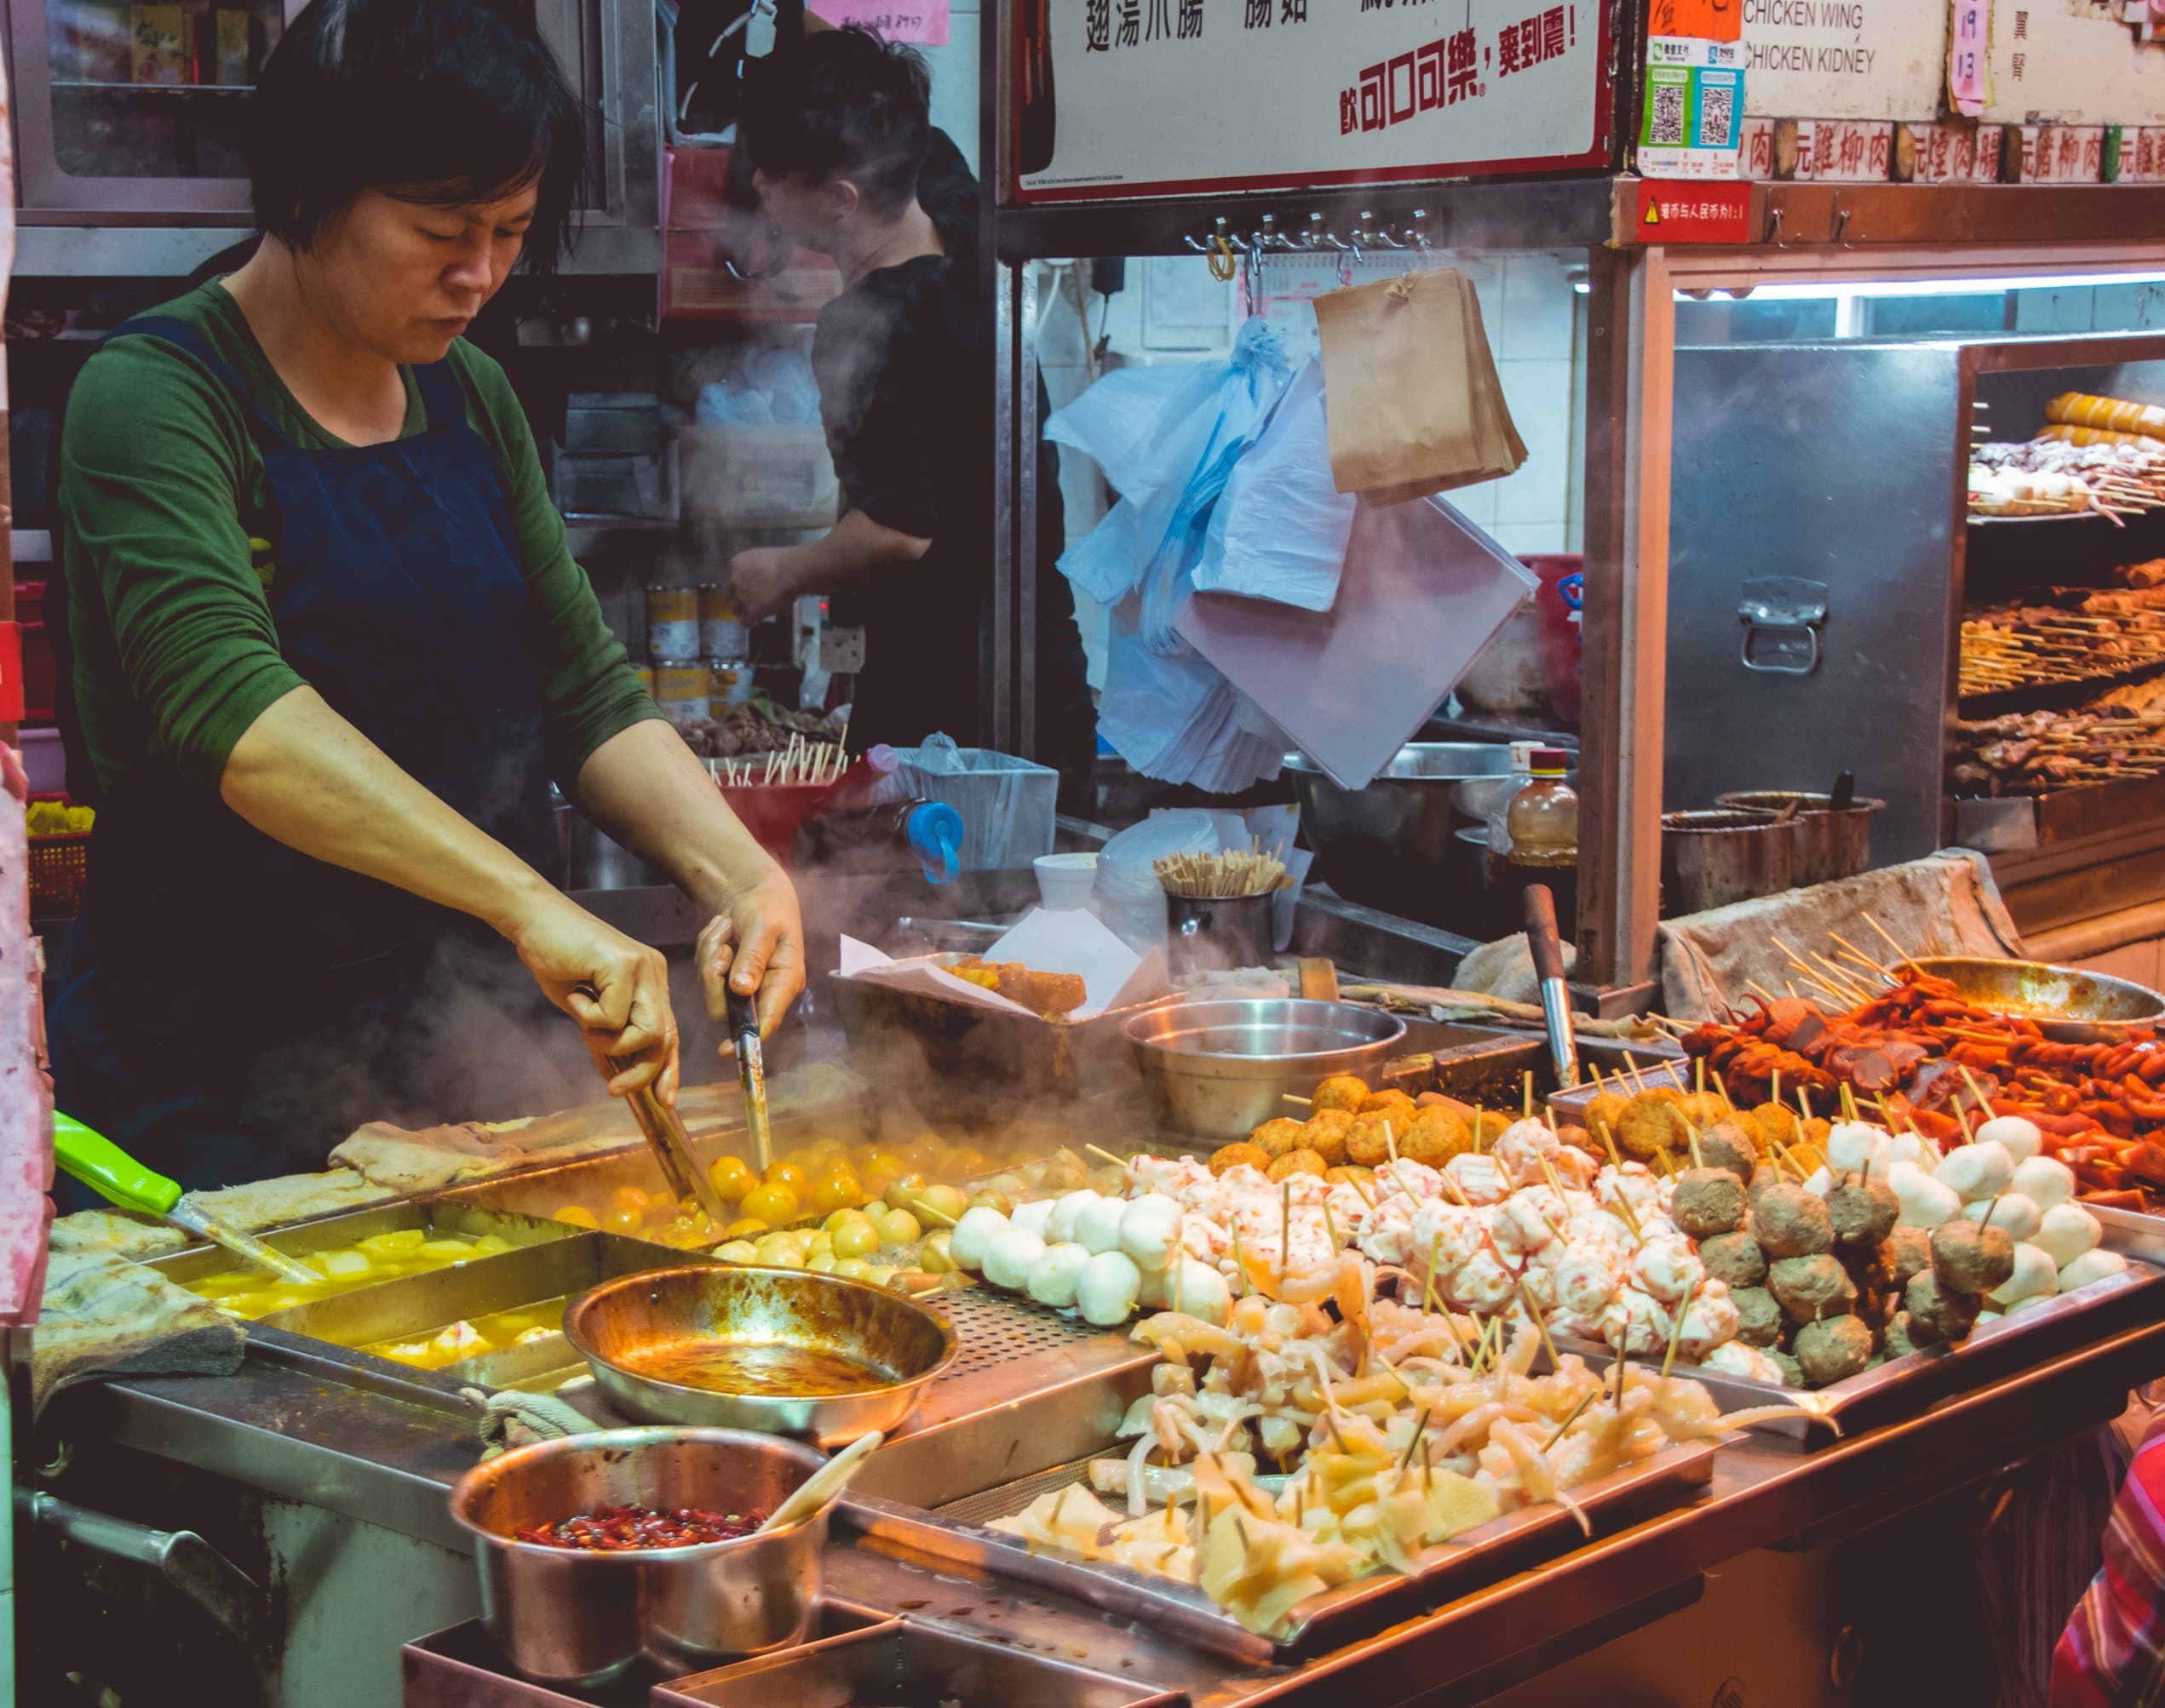 A scene from a street food market in Hong Kong. 